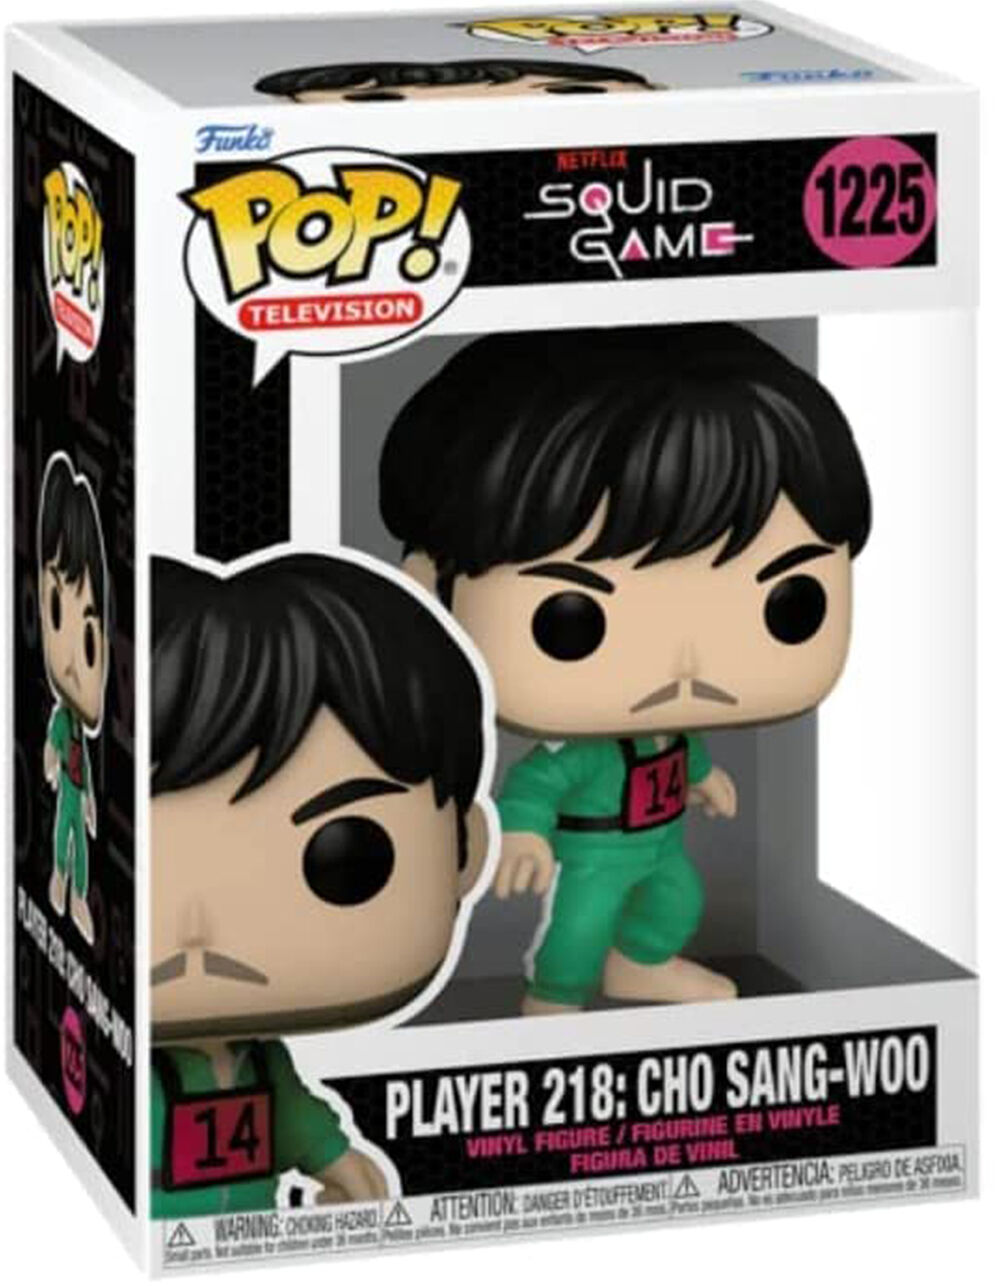 Player 218 Cho Sang-Woo Funko Pop Squid Game 1225 W/ Protector